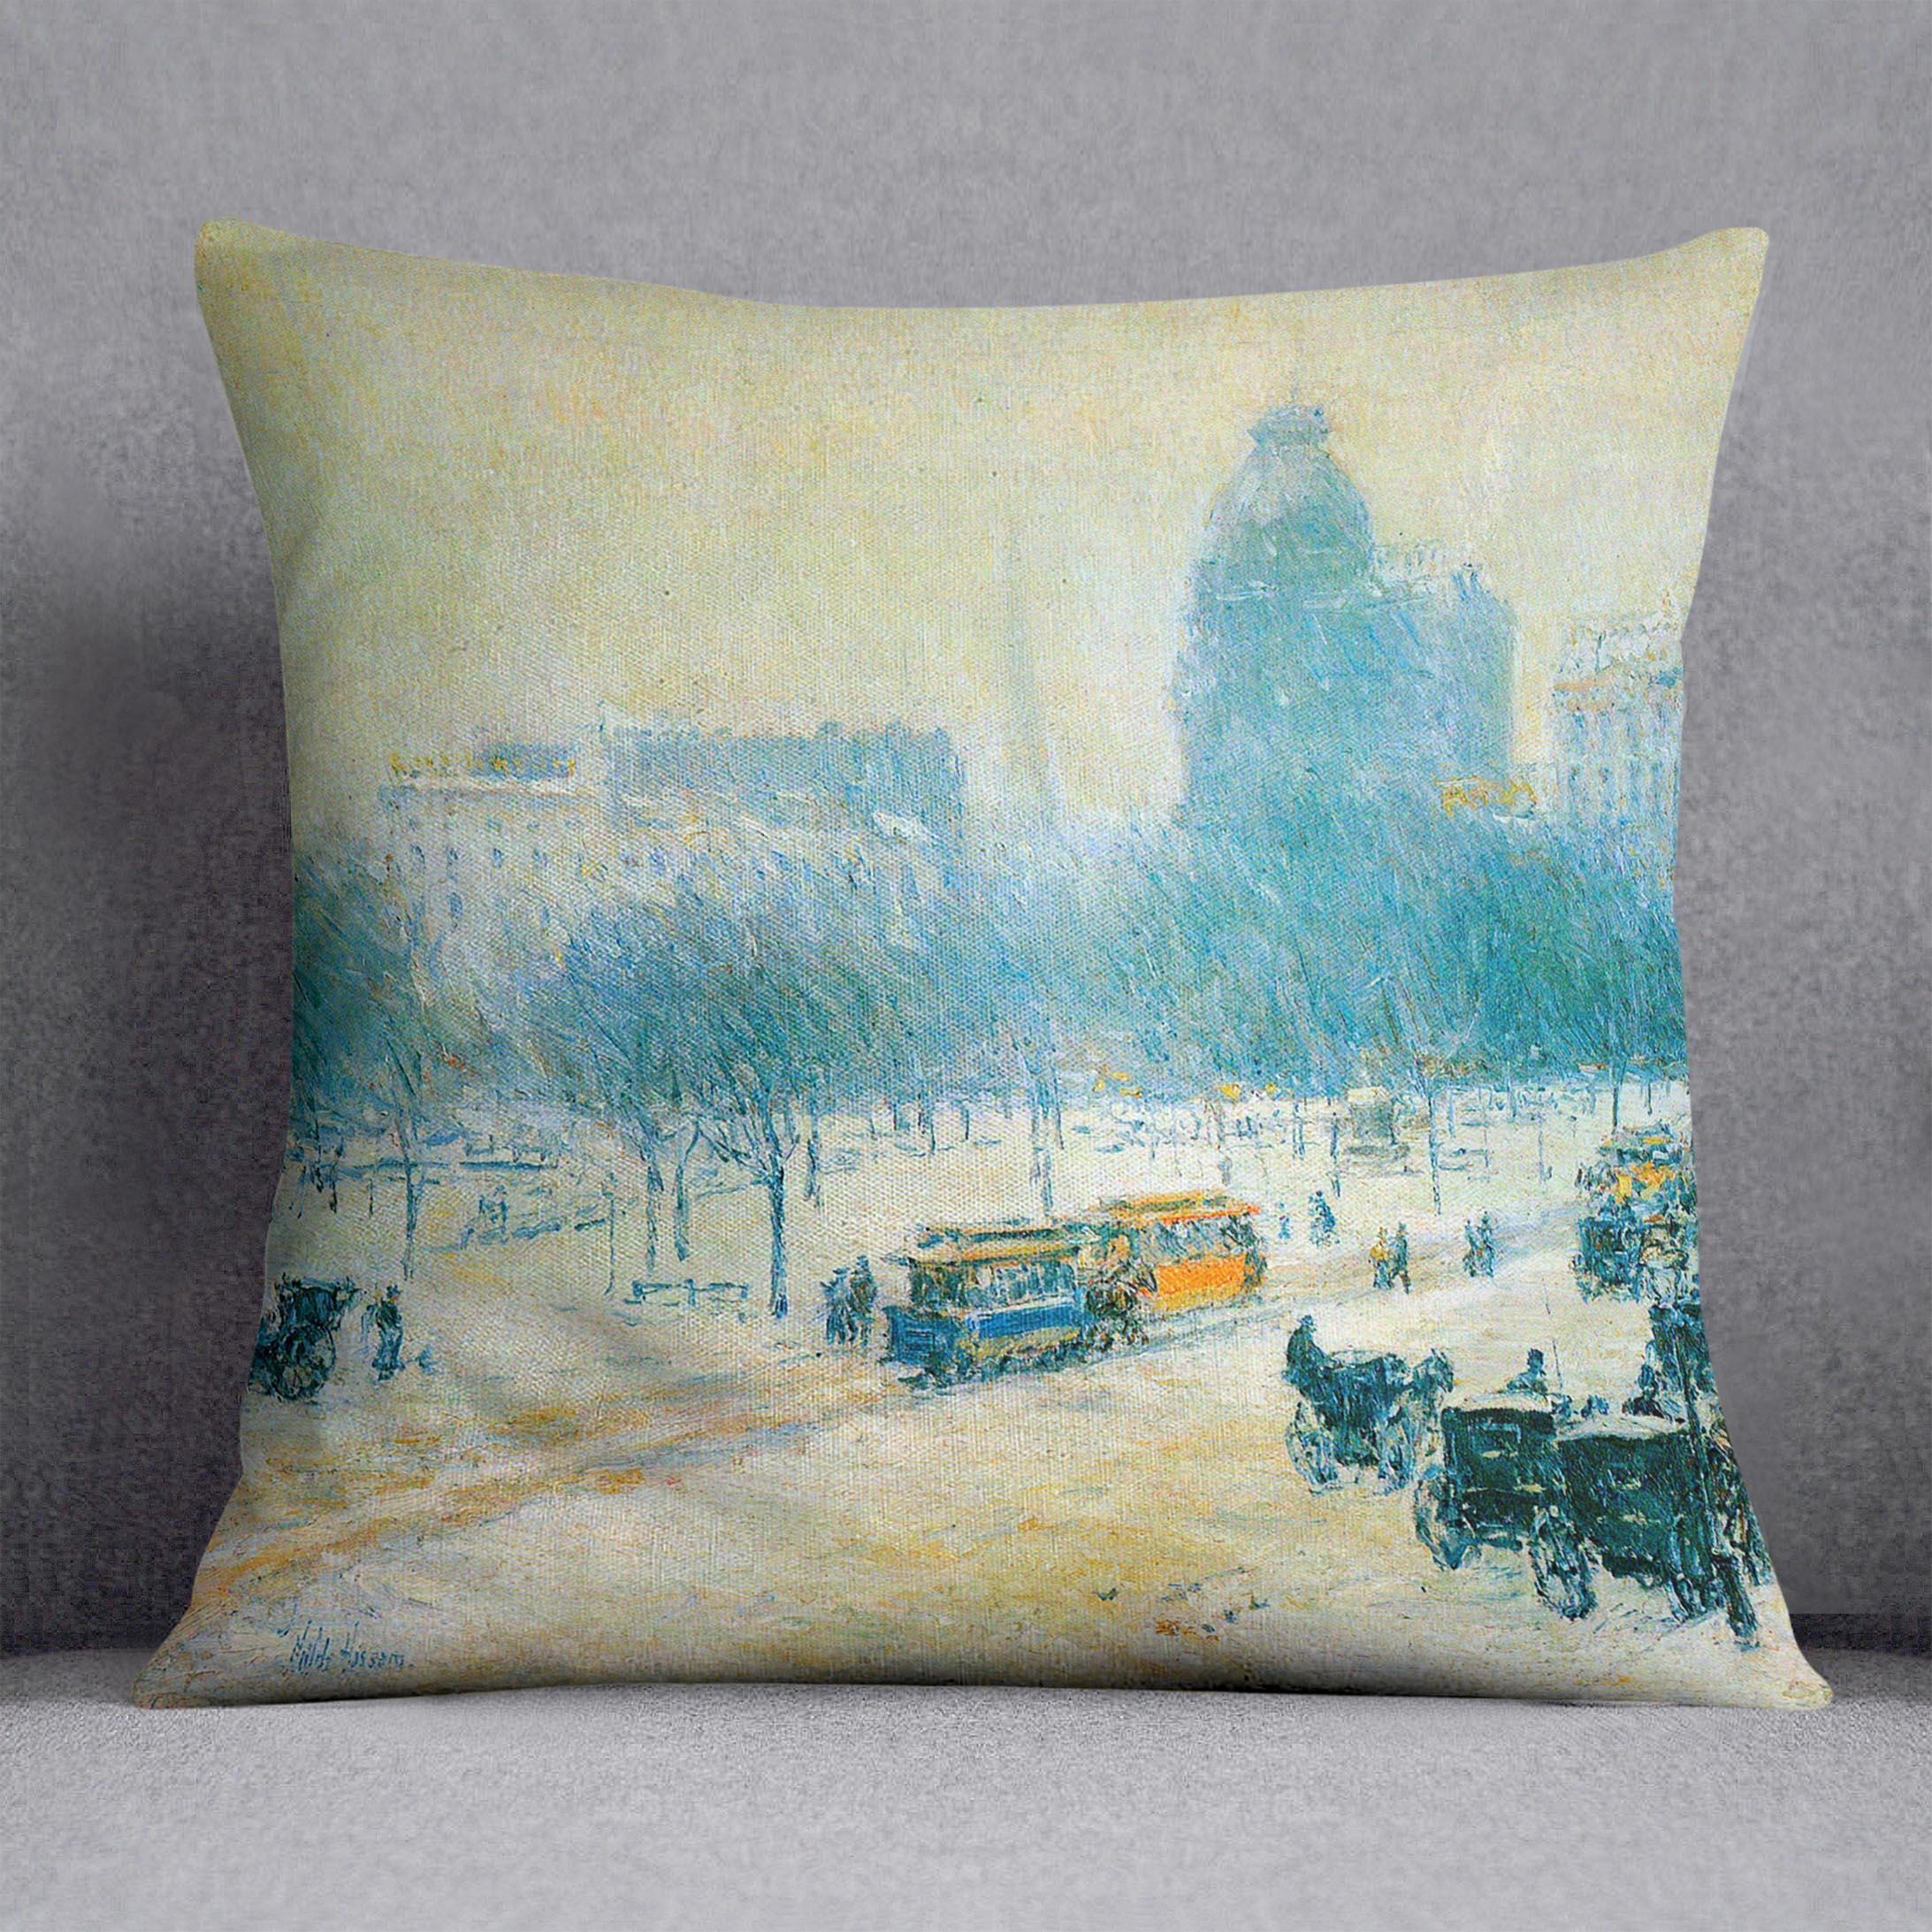 Winter in Union Square by Hassam Cushion - Canvas Art Rocks - 1